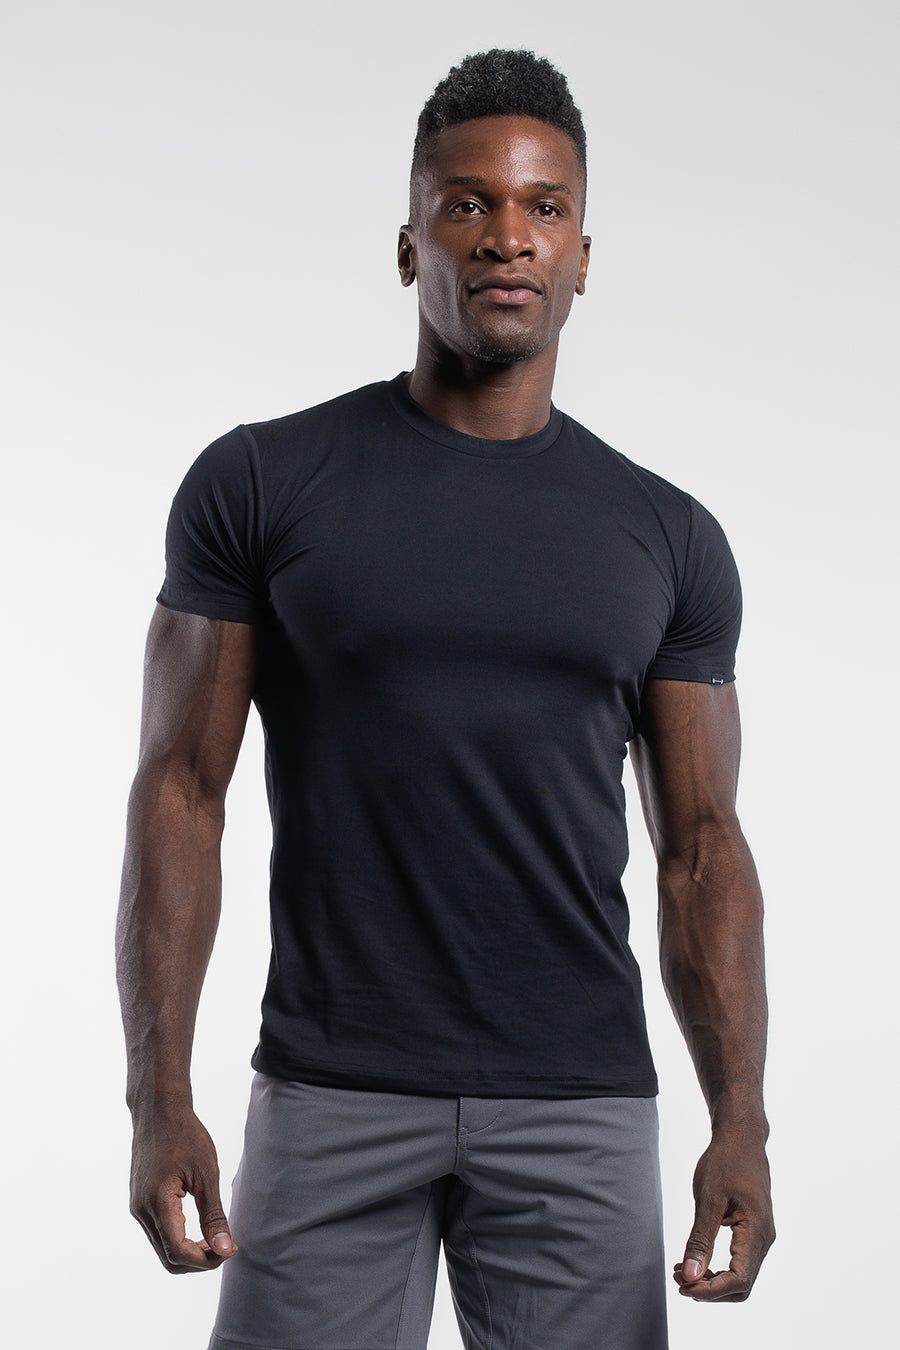 Details about   Mens Compression Breathable Long Sleeve Under Skins Gym Boxer Solid T Shirts Top 